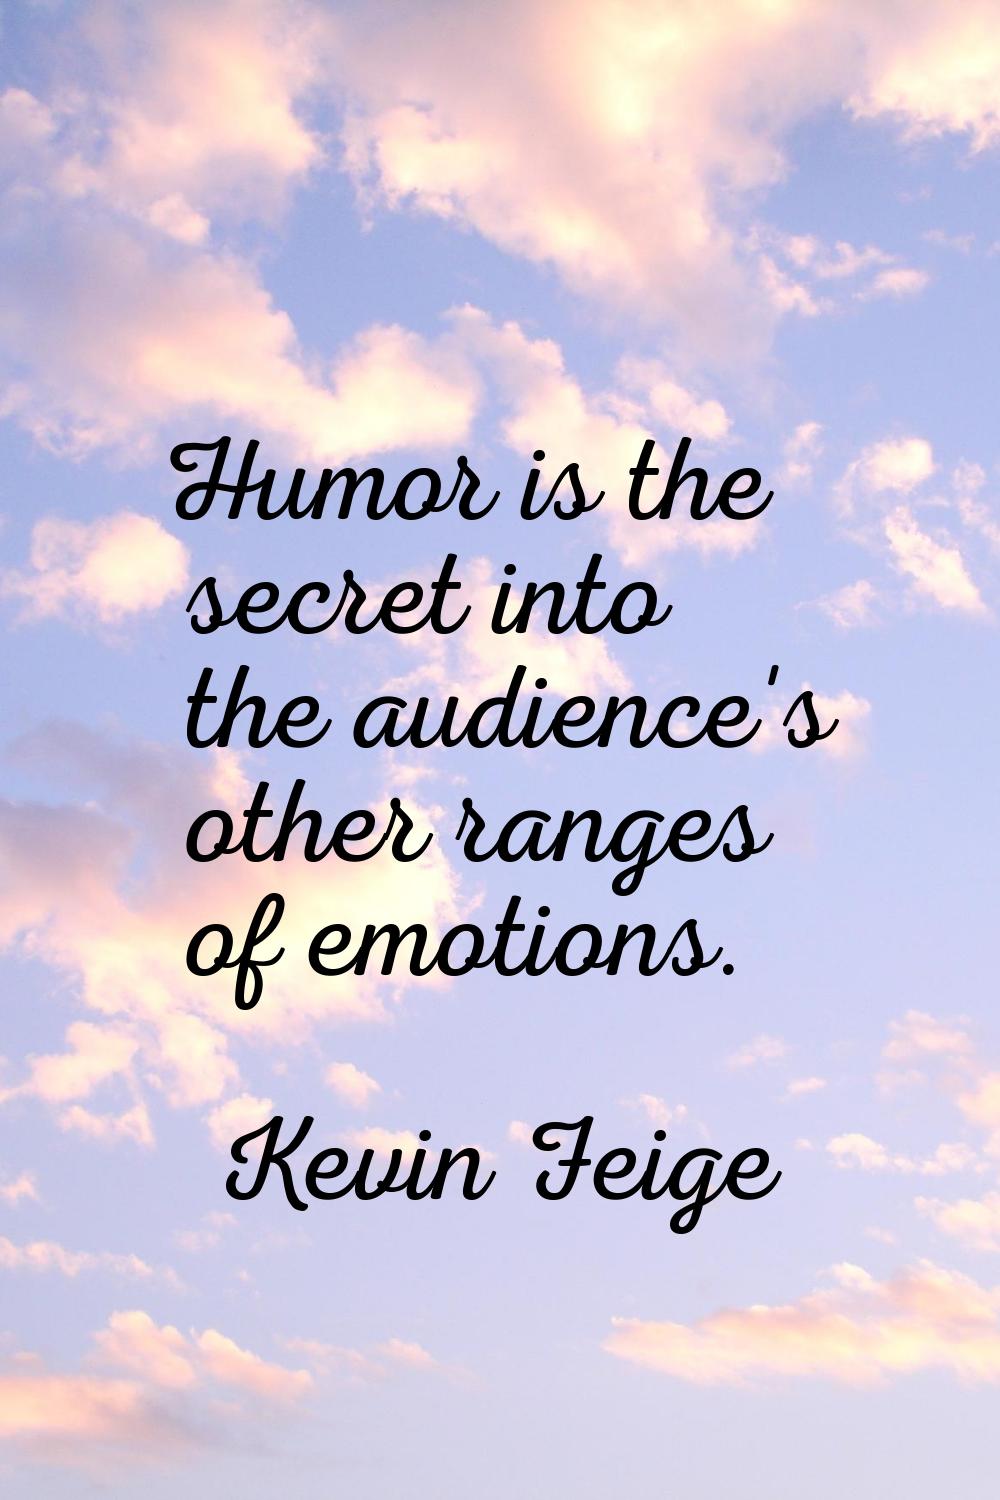 Humor is the secret into the audience's other ranges of emotions.